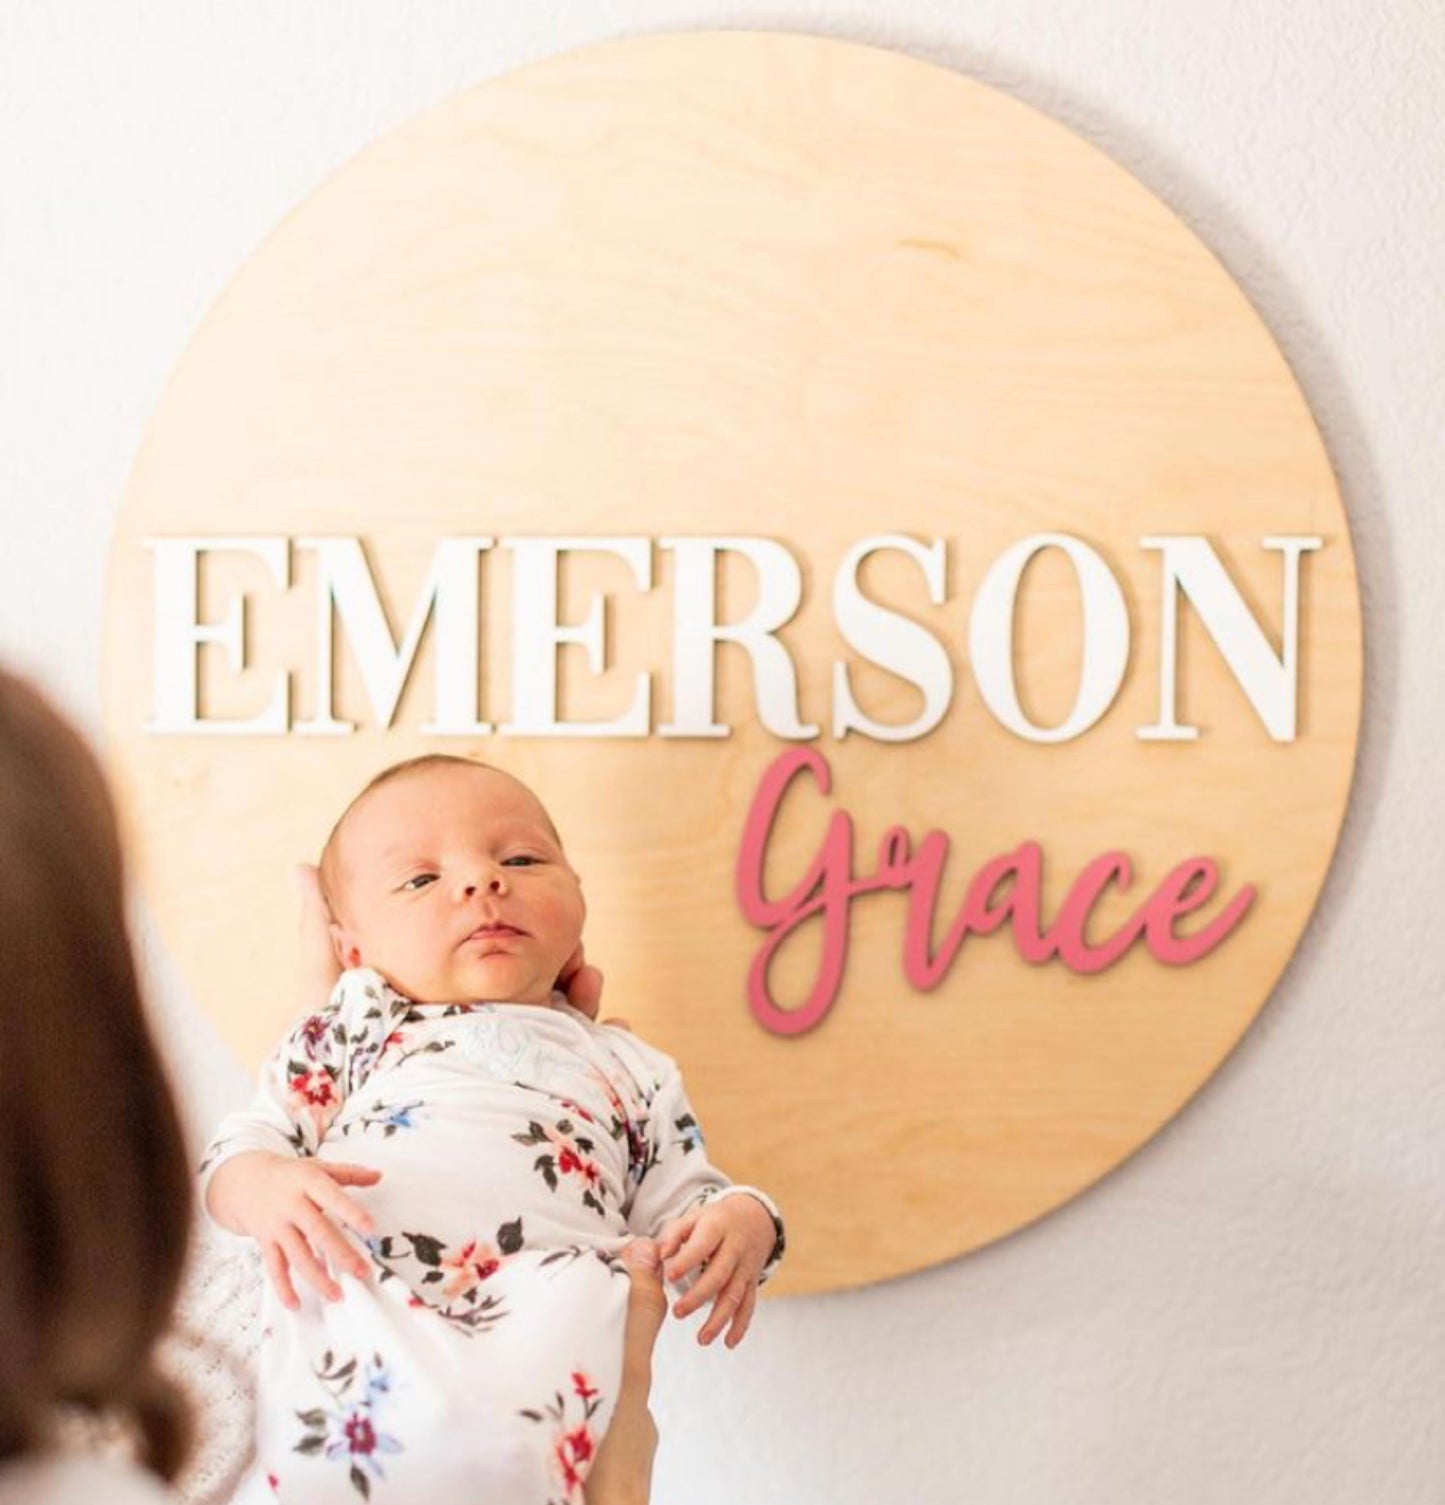 The Emerson Nursery Round Sign